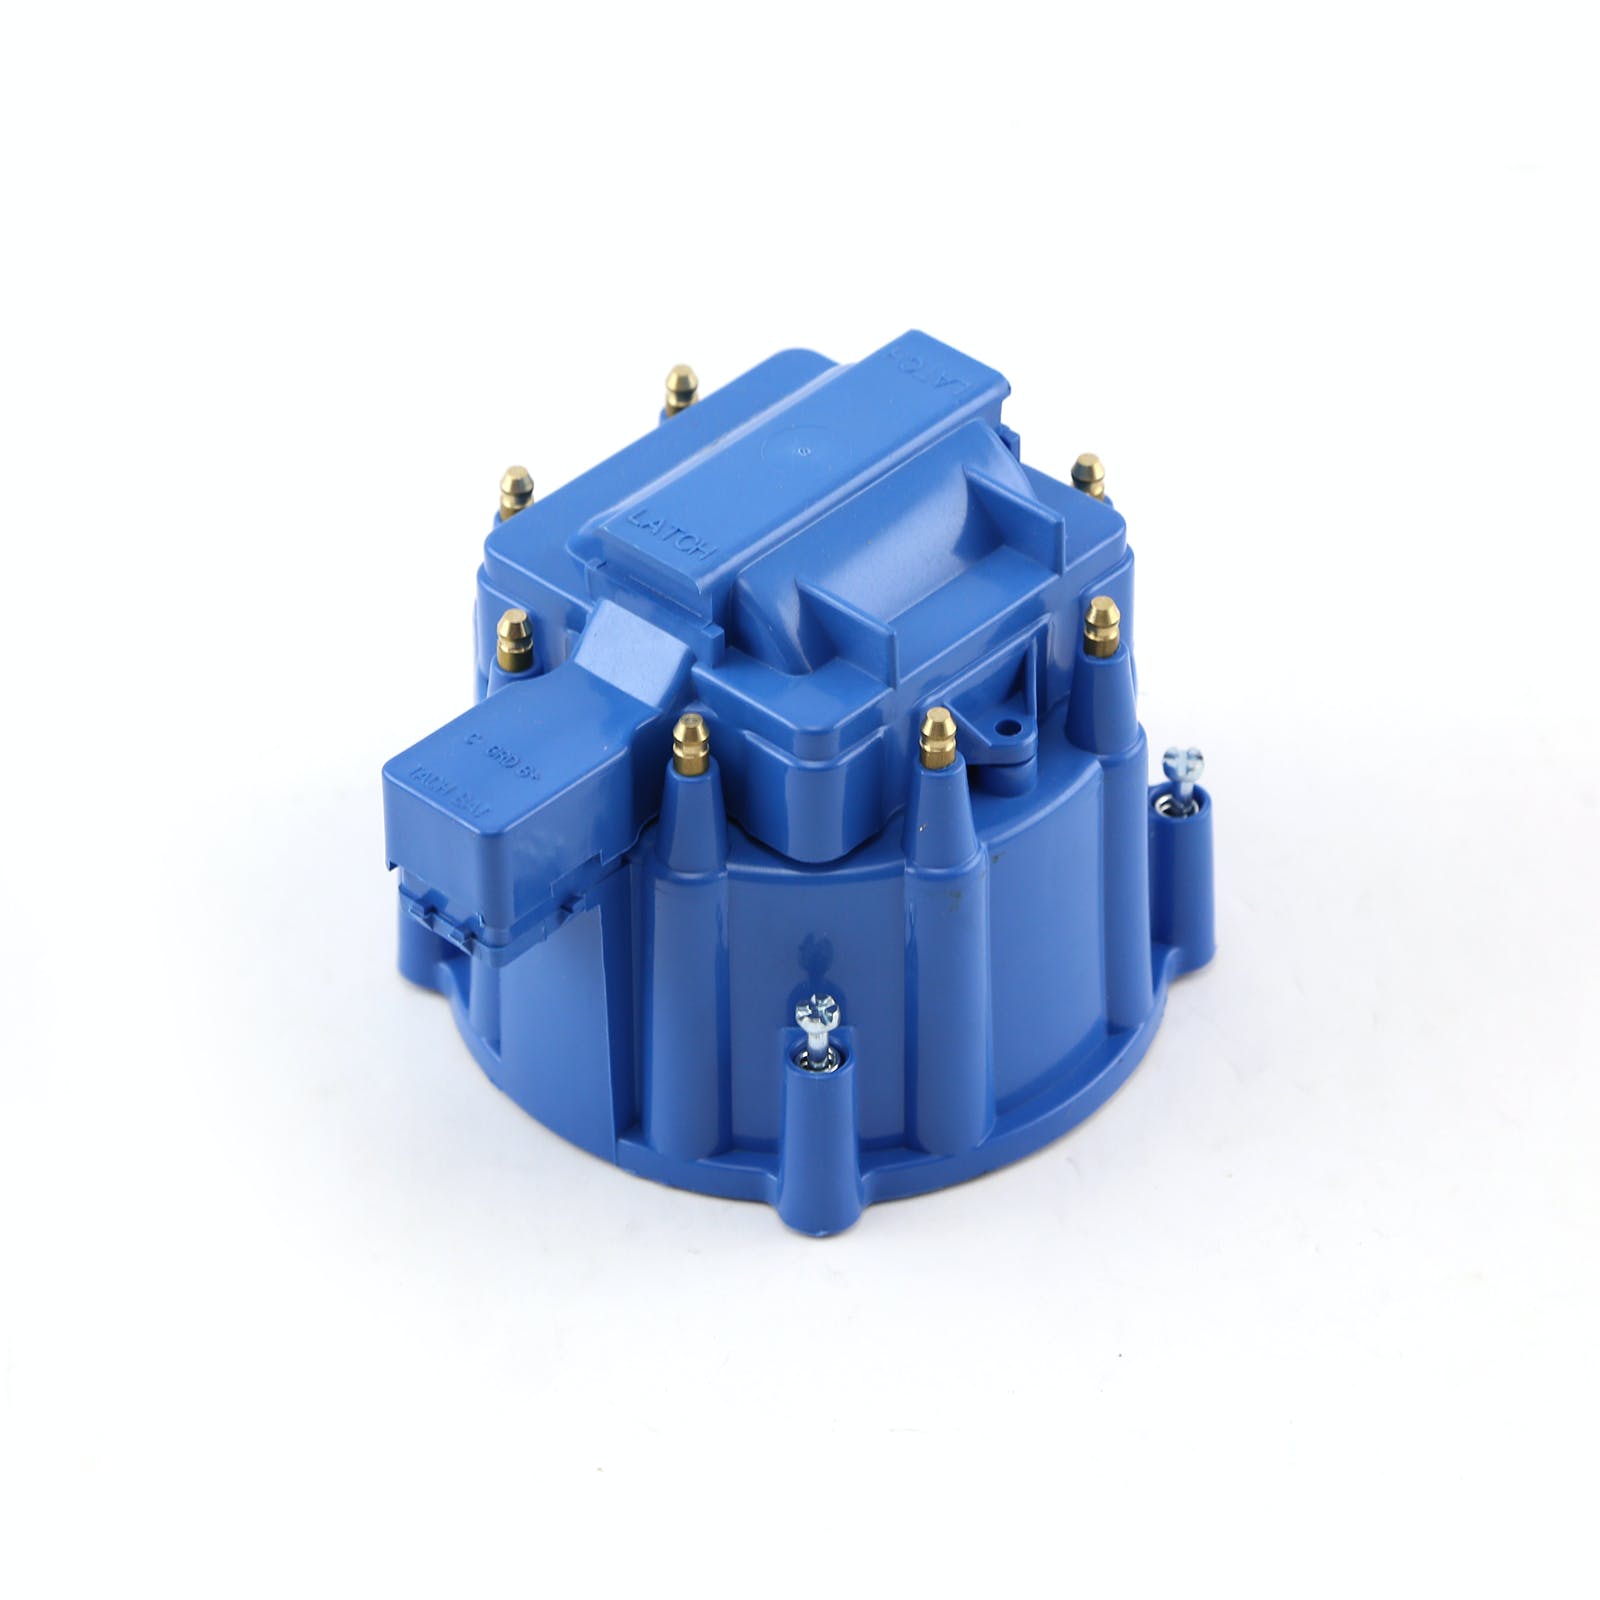 Speedmaster PCE370.1003 HEI Distributor Cap and Coil Cover - Blue